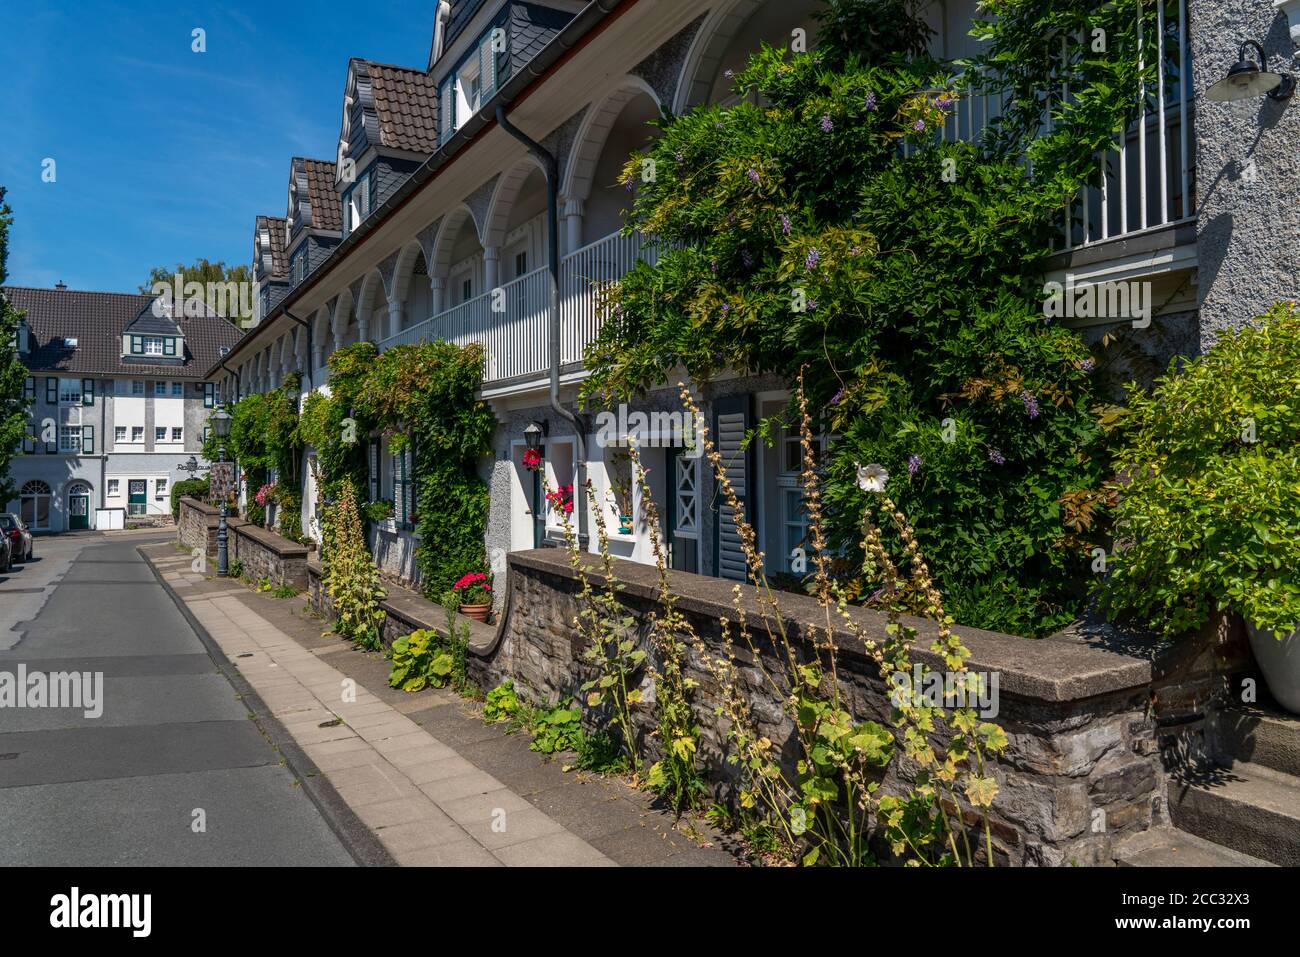 Houses on the market place of the Margarethenhöhe settlement, listed garden city settlement, built from 1906 to 1938, Essen, Germany Stock Photo